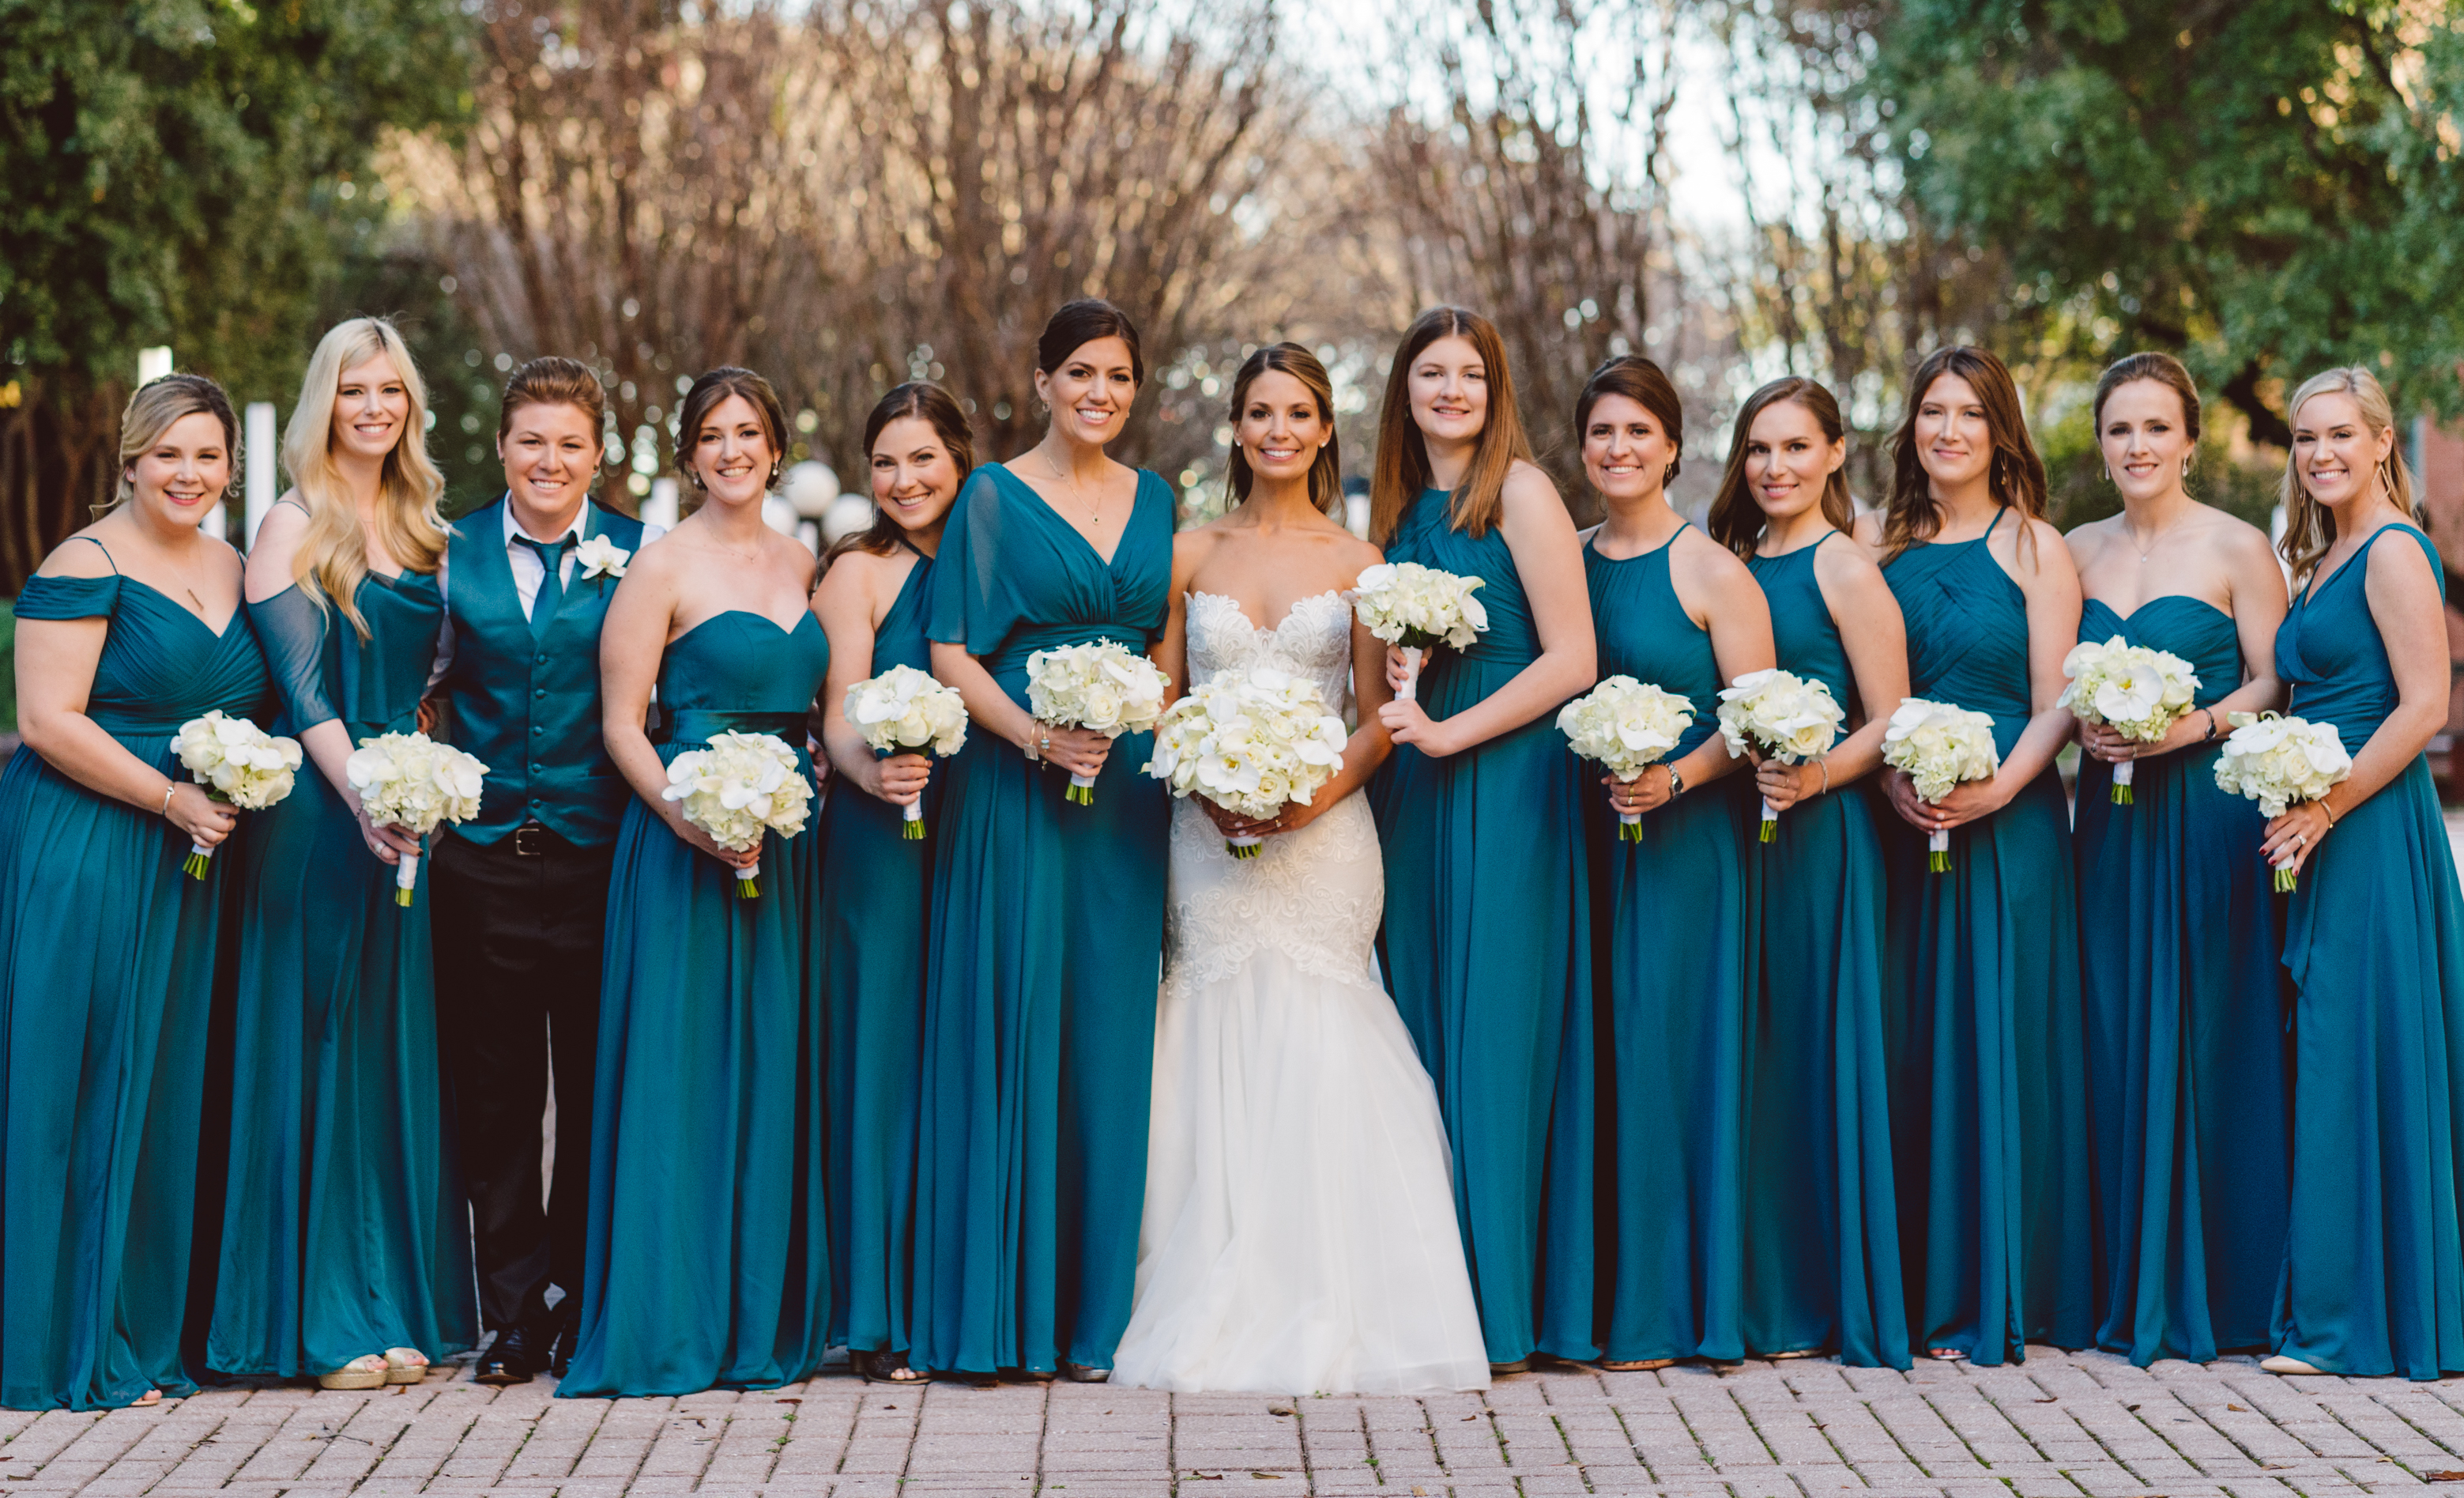 A bride poses with her bridesmaids outside. They are all wearing deep teal dresses for an opulent winter wedding in Houston.